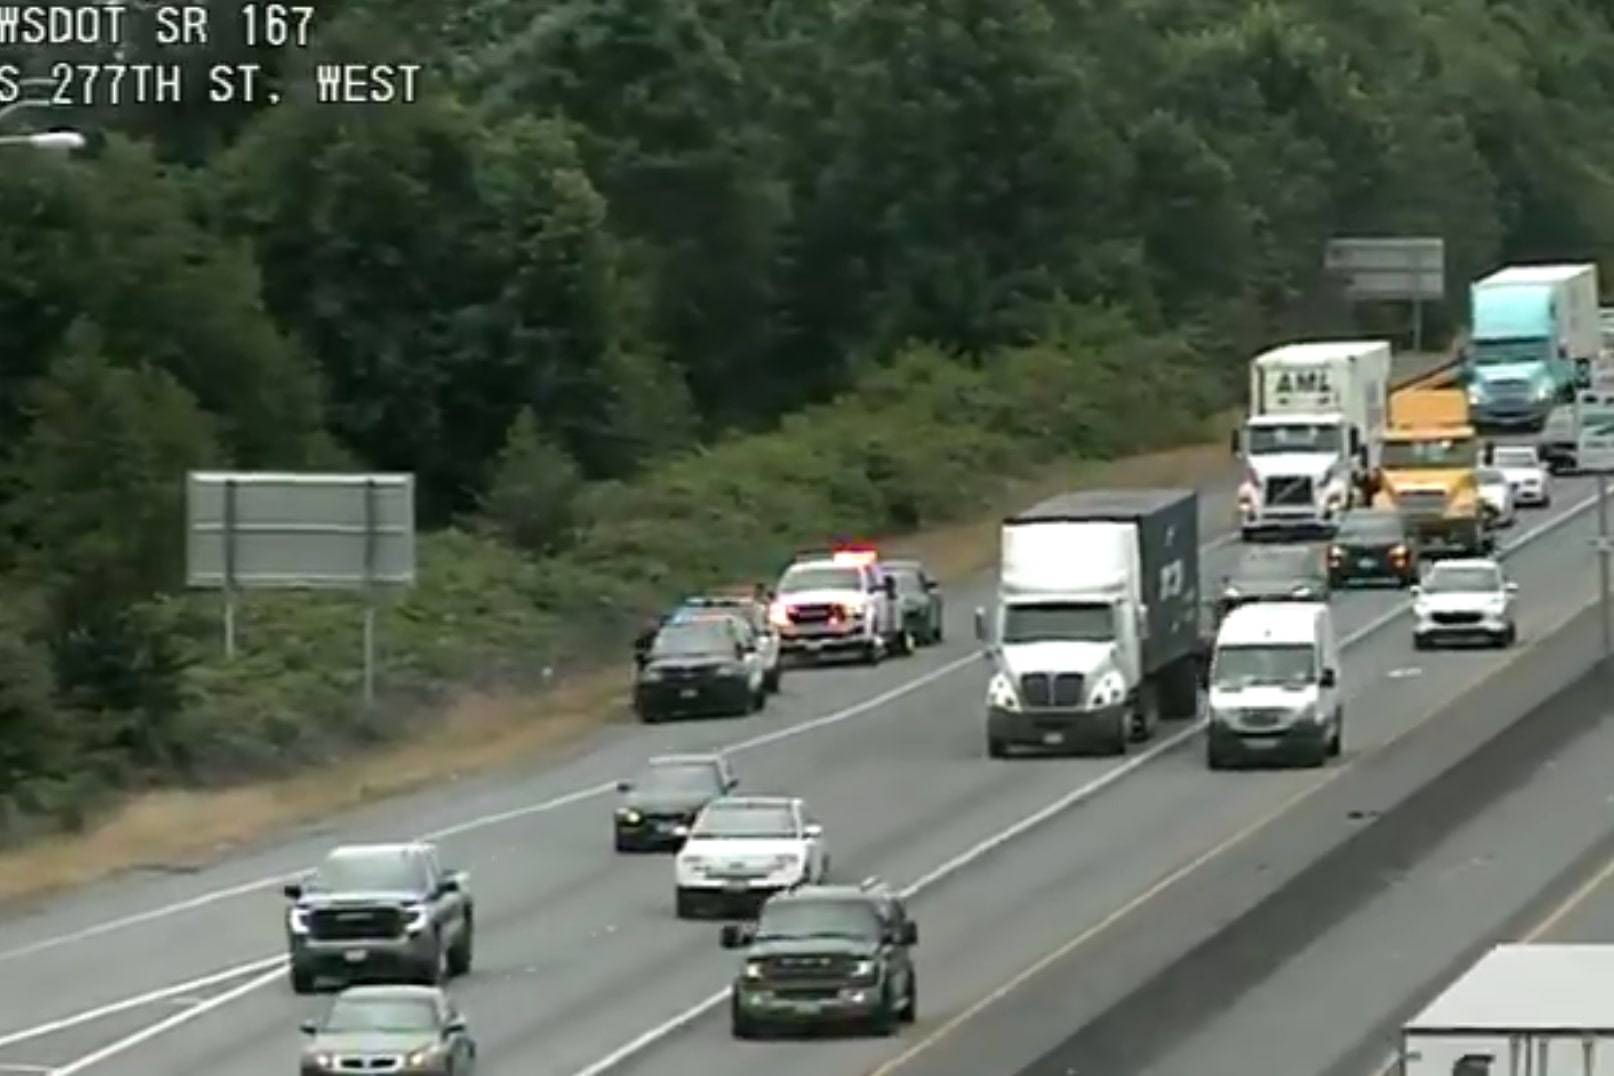 In a Twitter post by WSDOT about 10:30 a.m. Wed., July 7: A vehicle is seen on the shoulder after previously blocking the right lane on northbound SR 167 at South 277th St.